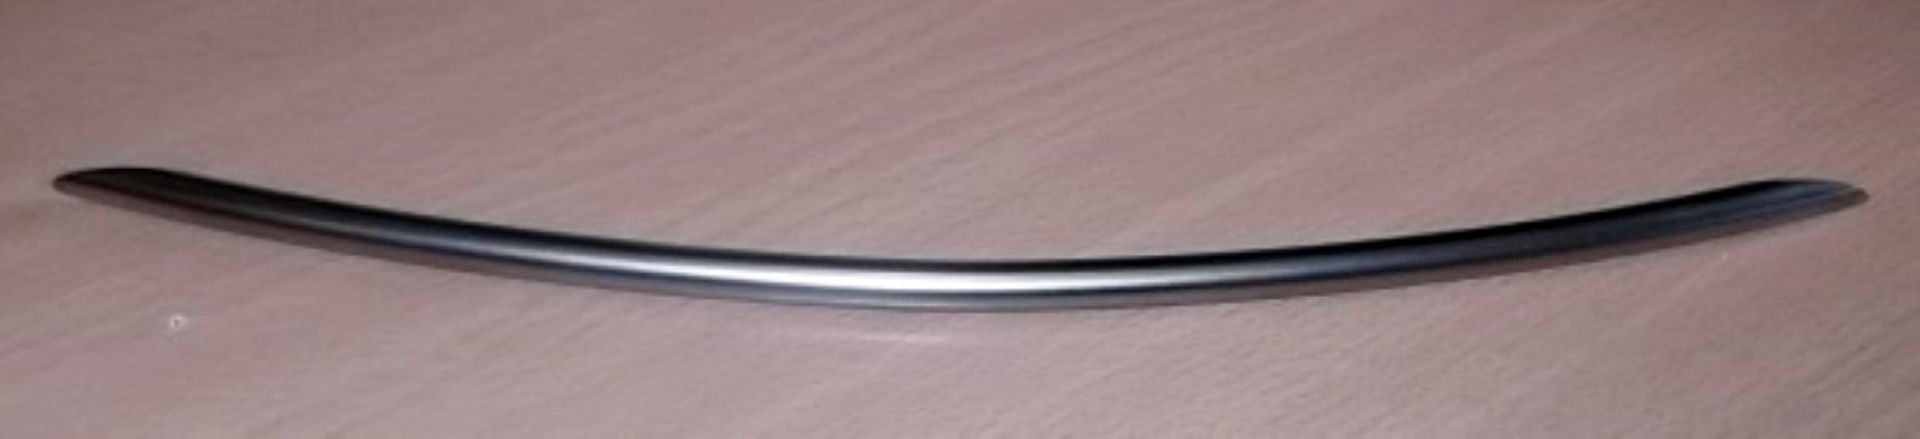 400 x BOW Handle Kitchen Door Handles By Crestwood - 320mm - New Stock - Brushed Nickel Finish - - Image 10 of 10